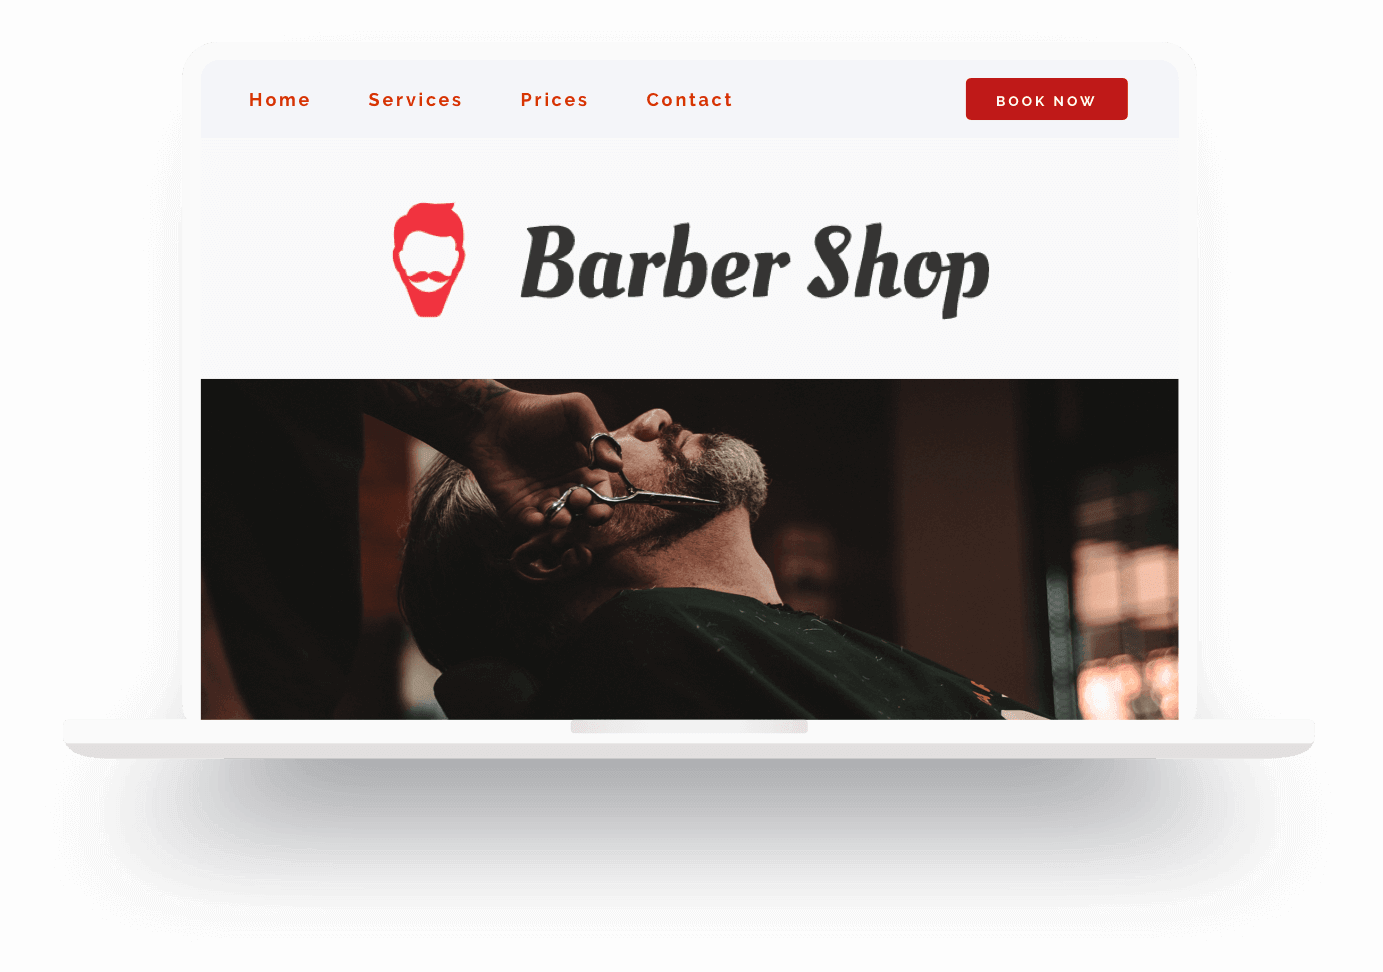 Example of a barbershop website built with Jimdo